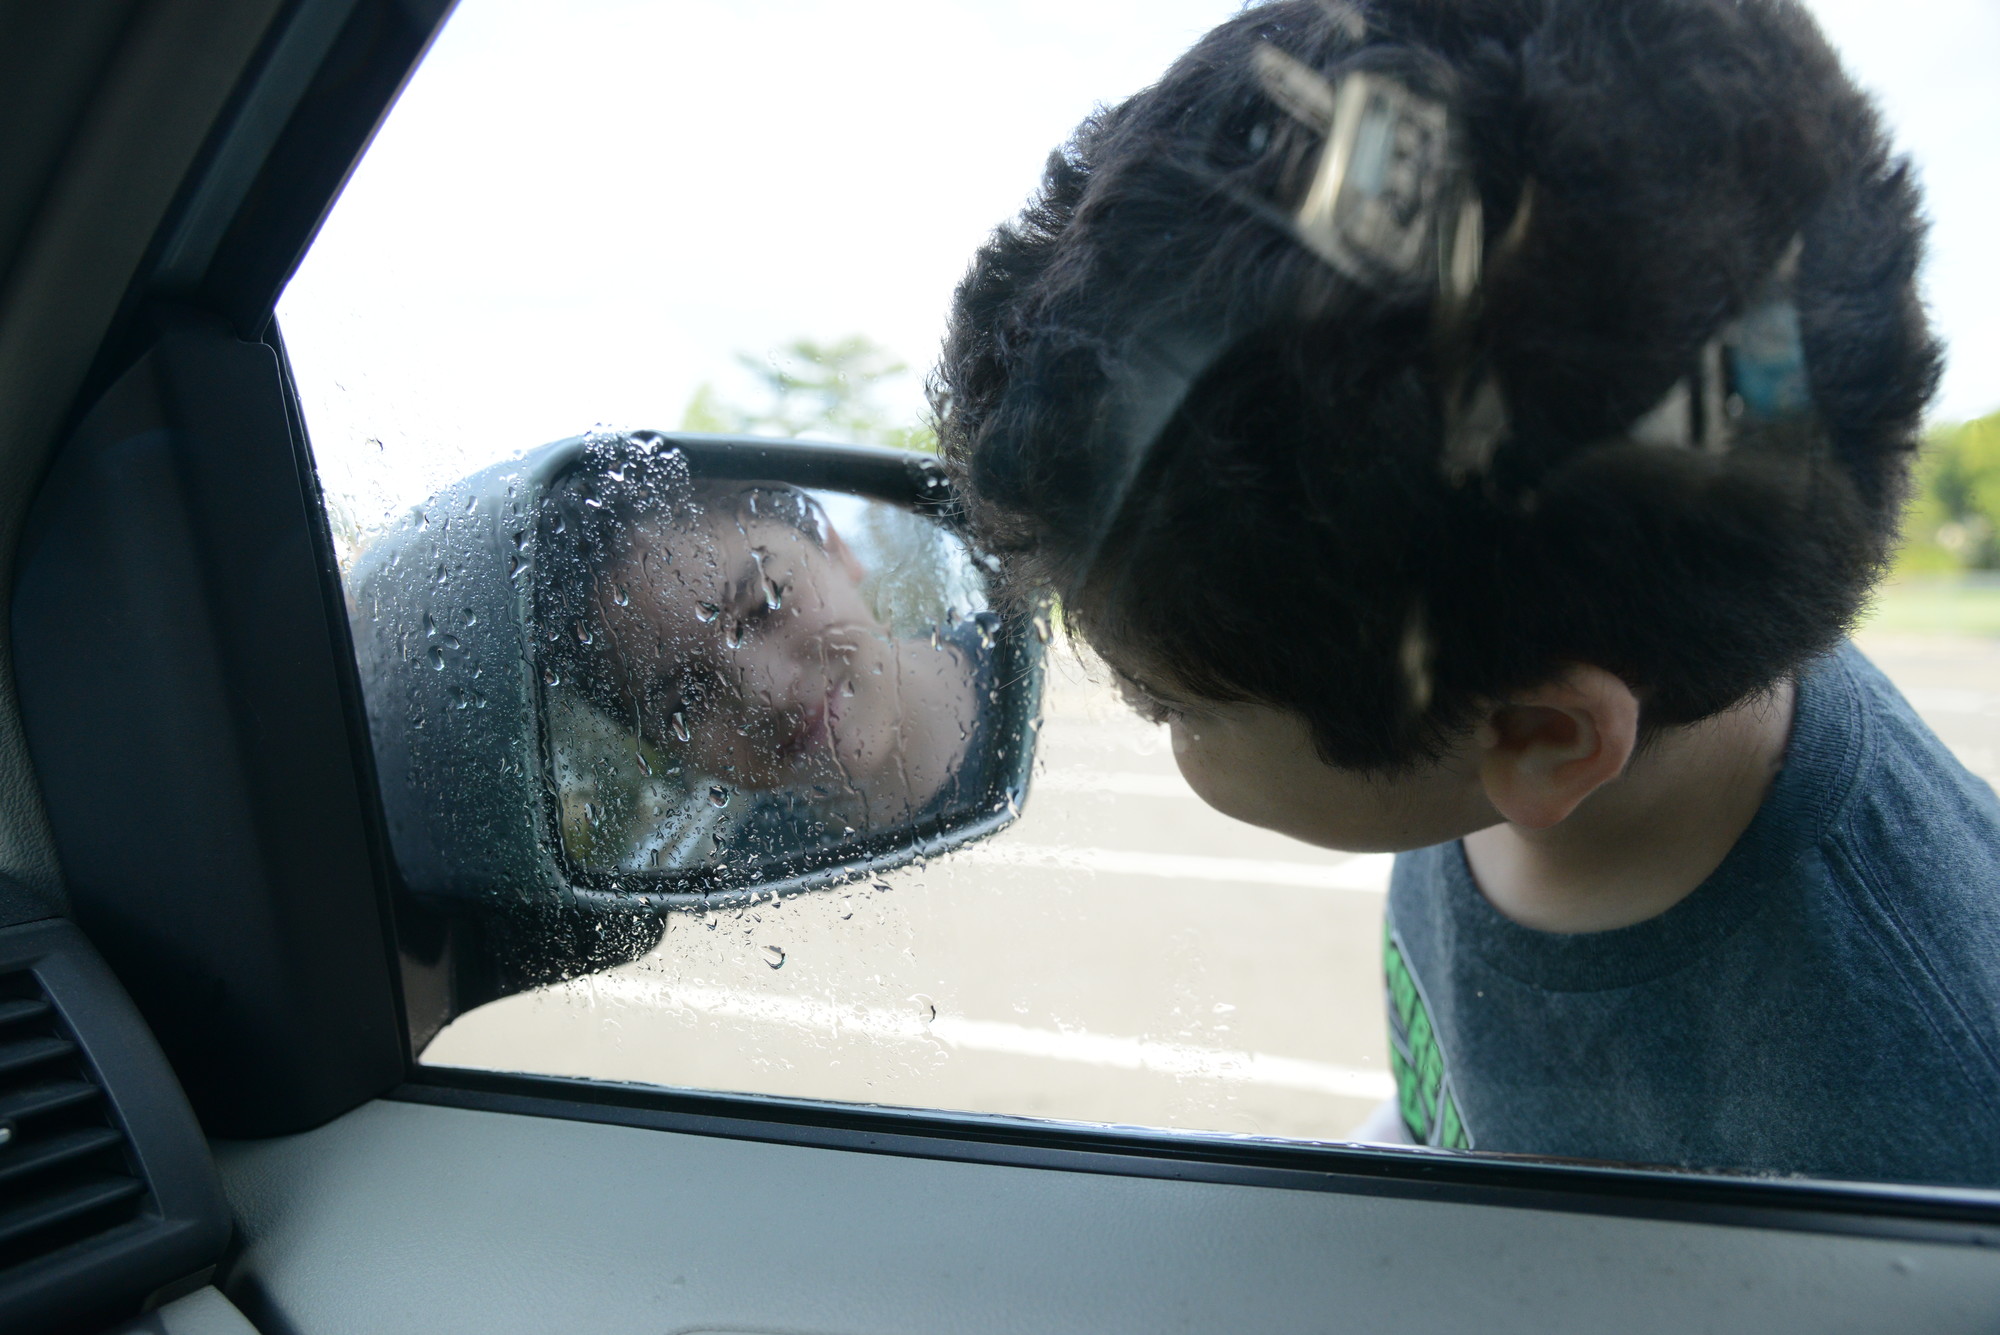 So clean, he could see his reflection. Oceanside Schools 4 and 5 held their car washes on Sept. 20.